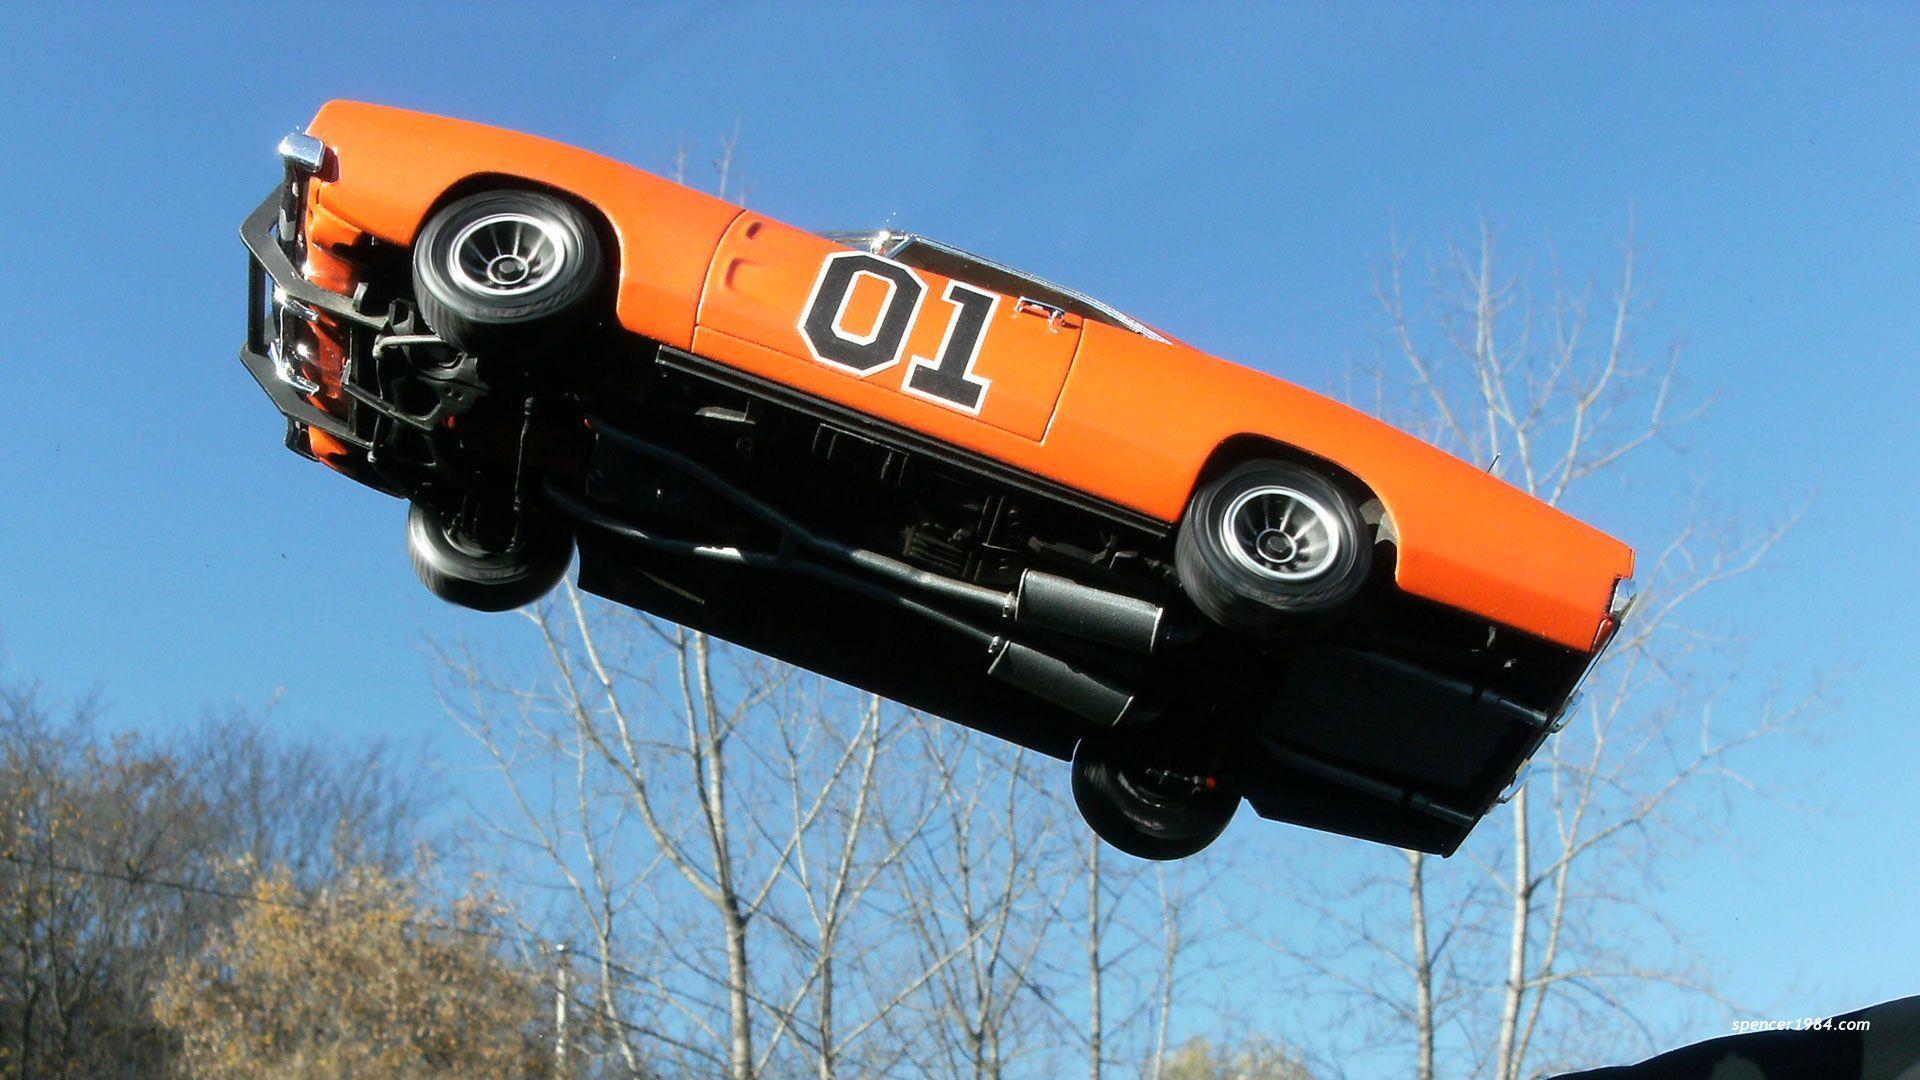 General Lee Wallpapers For Mobile Phones